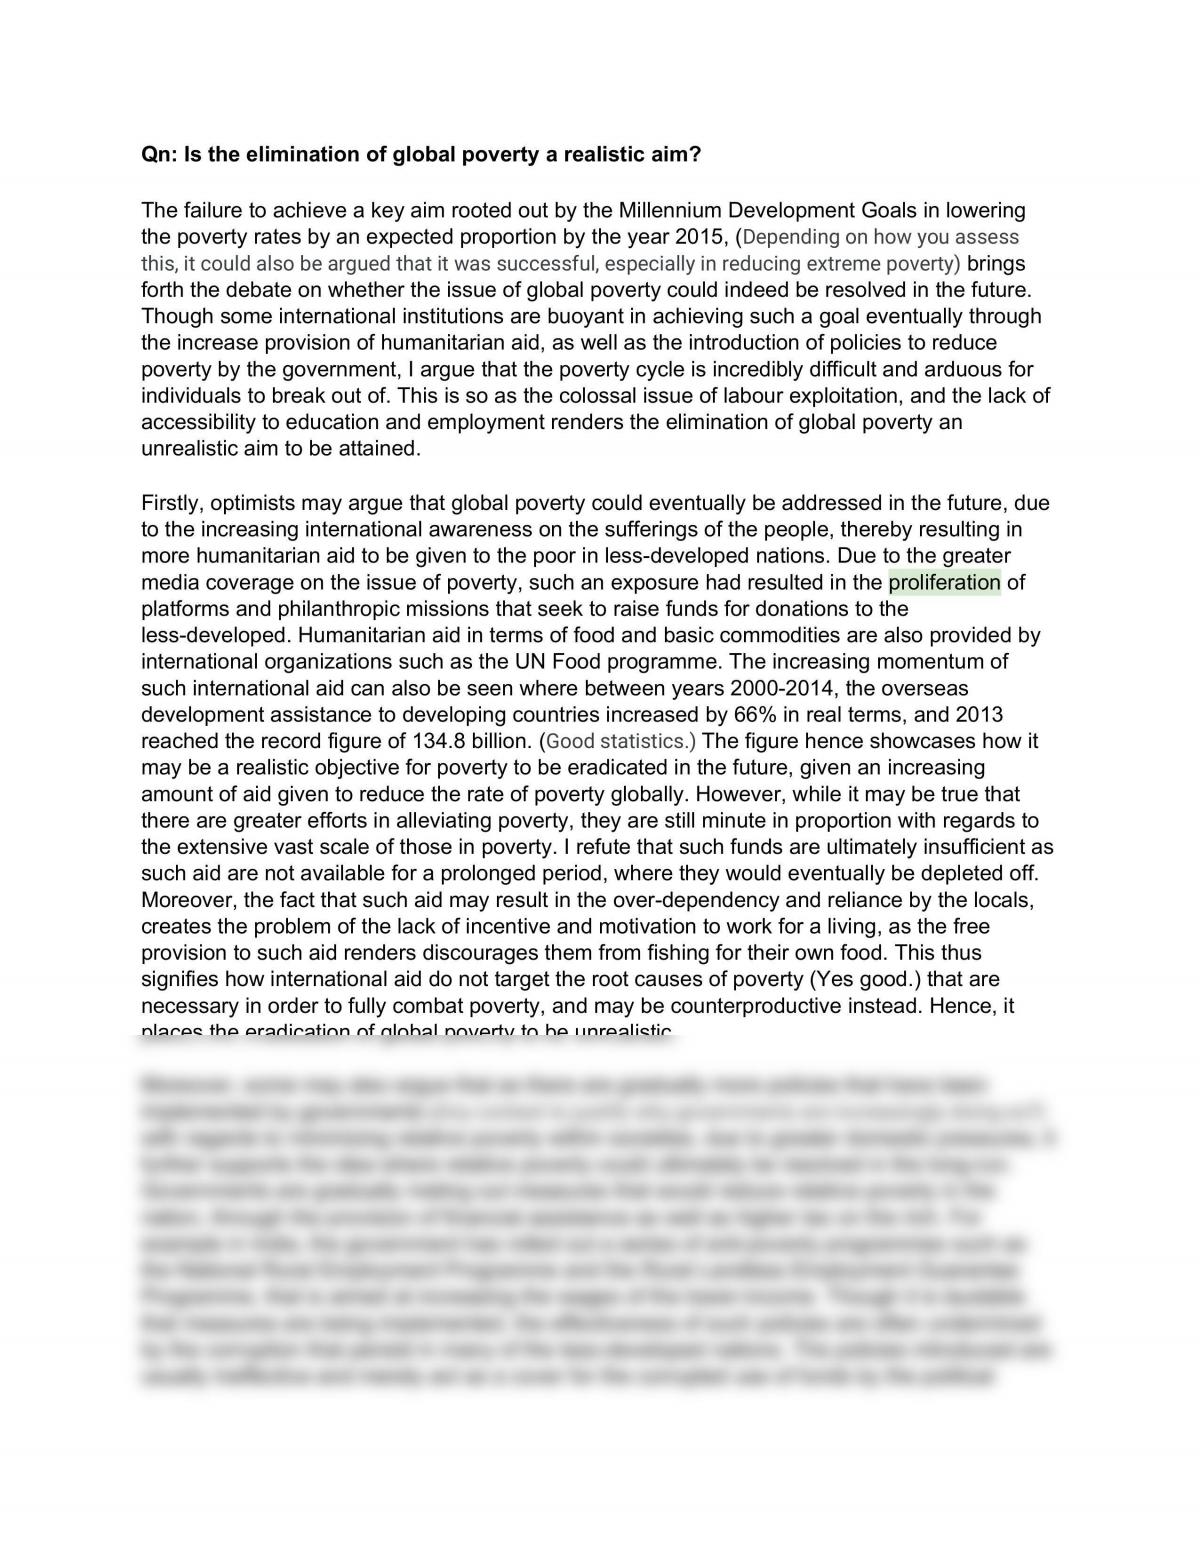 GP Essay: Poverty as an aim - Page 1